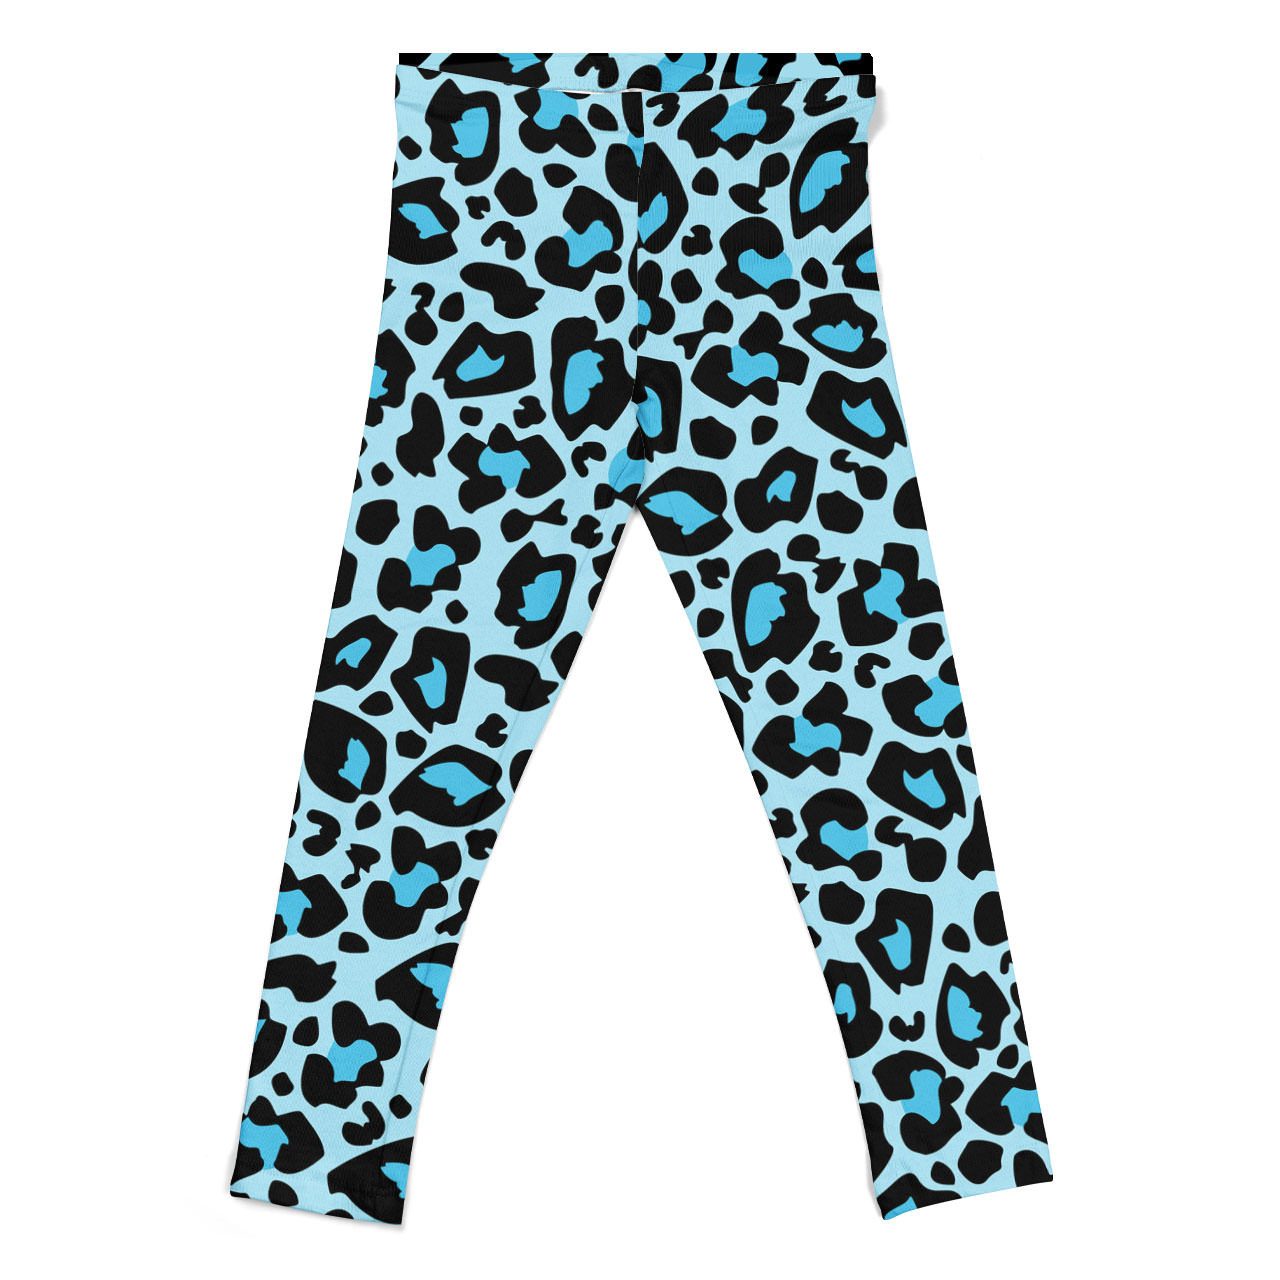 Women's Gym Leggings BLUE CHEETAH E-store repinpeace.com - Polish  manufacturer of sportswear for fitness, Crossfit, gym, running. Quick  delivery and easy return and exchange